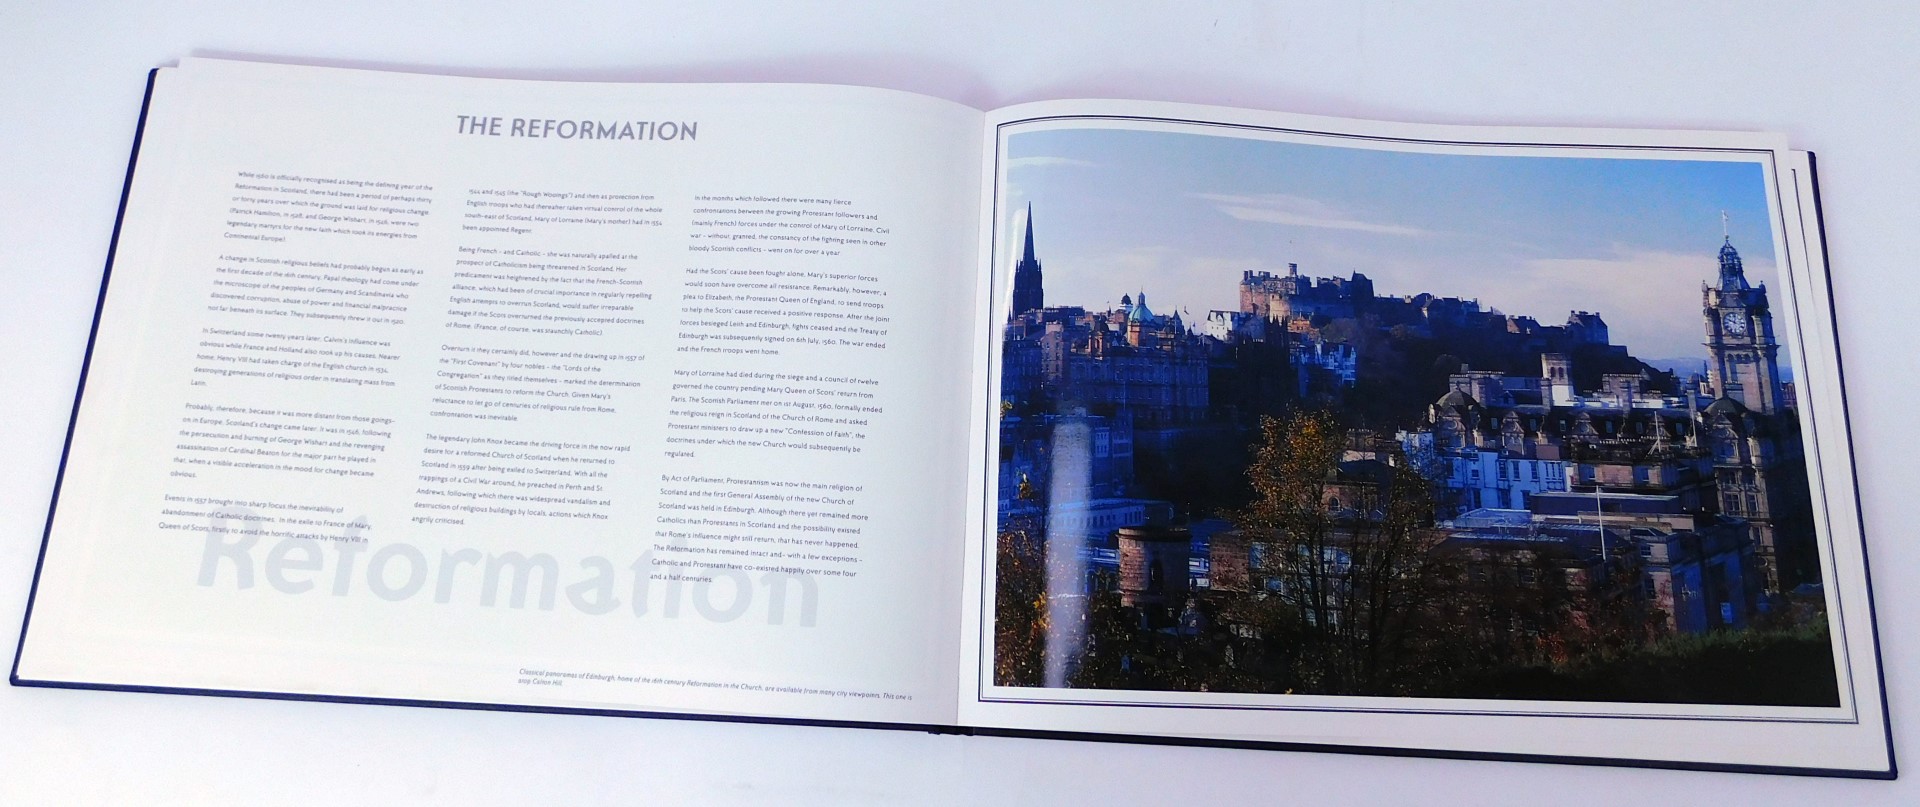 Ford (Donald). Millennium Images of Scotland, collector's book, with hand inscription to Sandy and D - Image 2 of 2